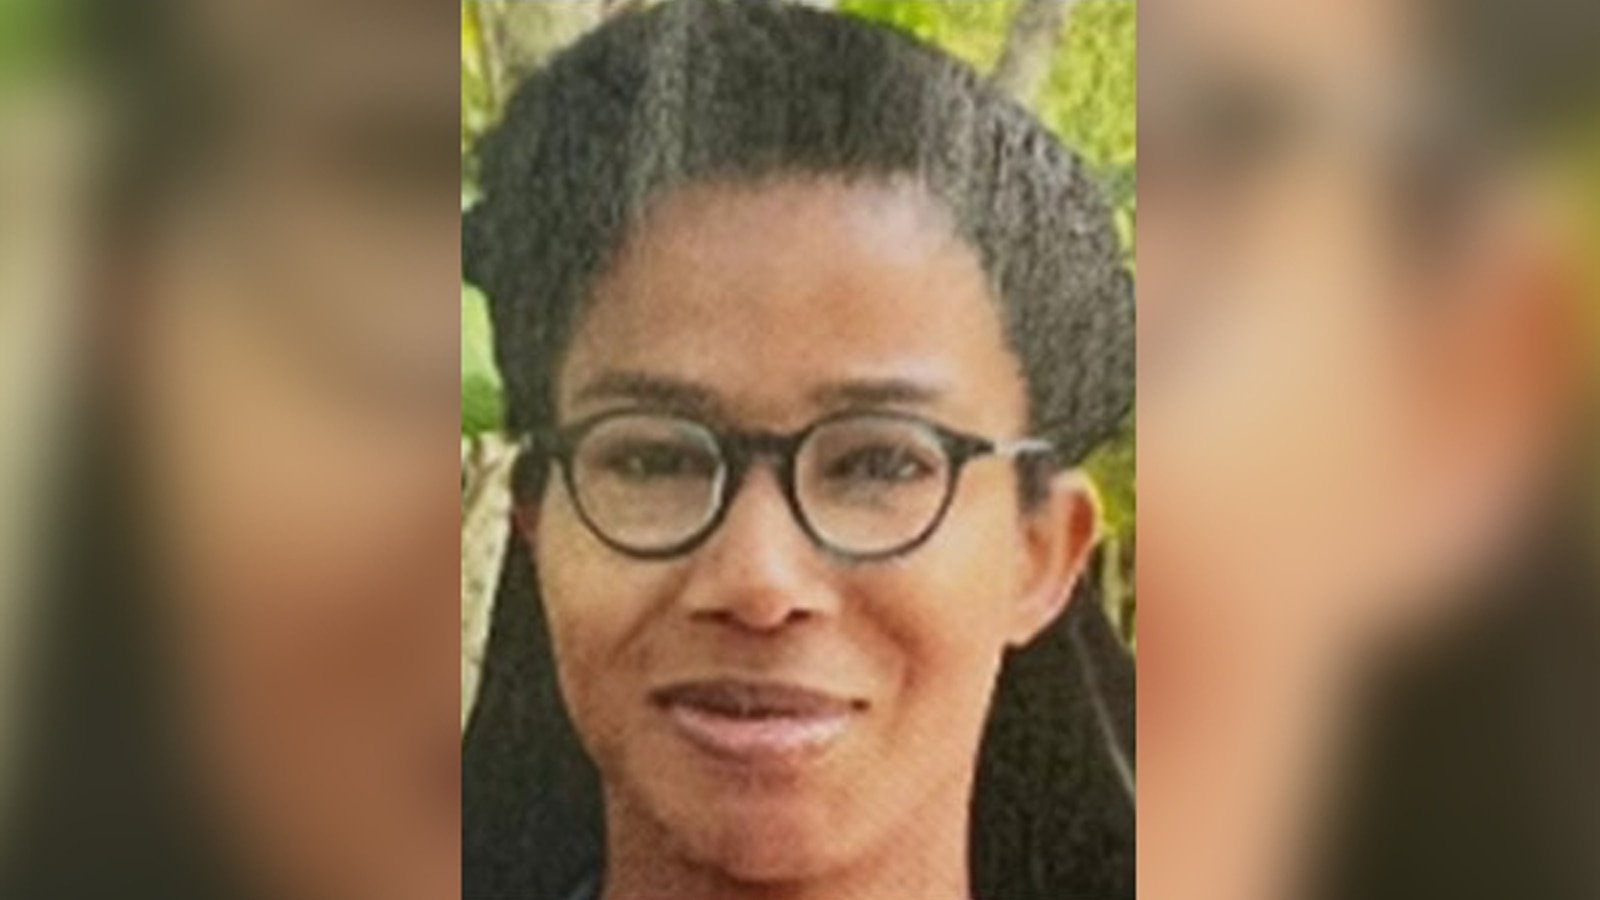 American woman goes missing while attending yoga retreat in the Bahamas